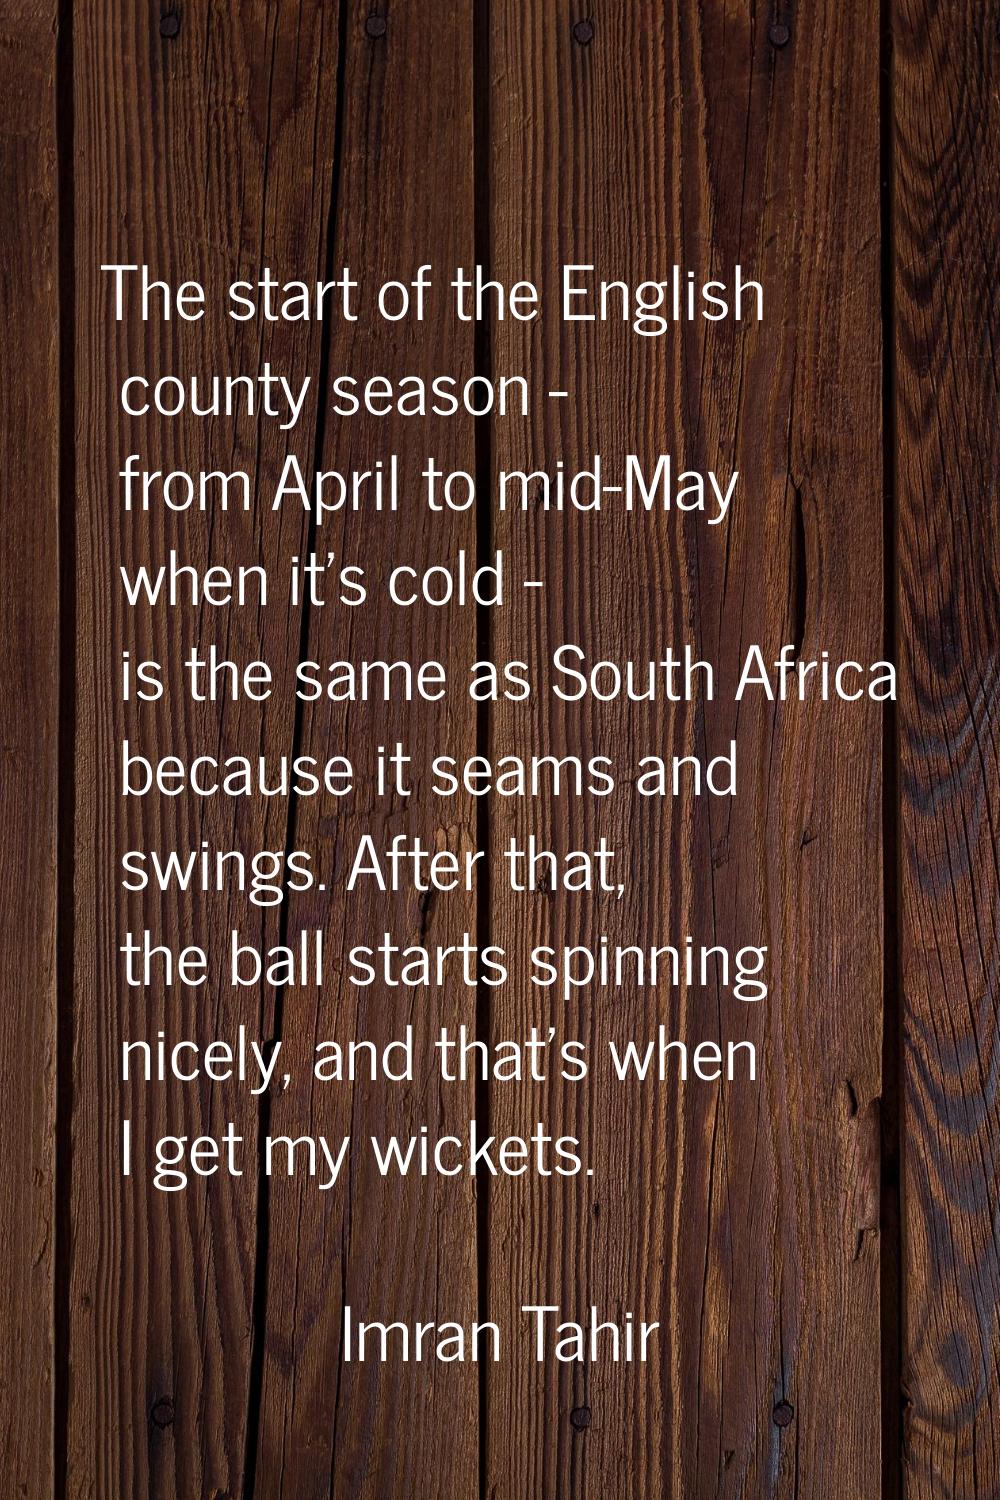 The start of the English county season - from April to mid-May when it's cold - is the same as Sout